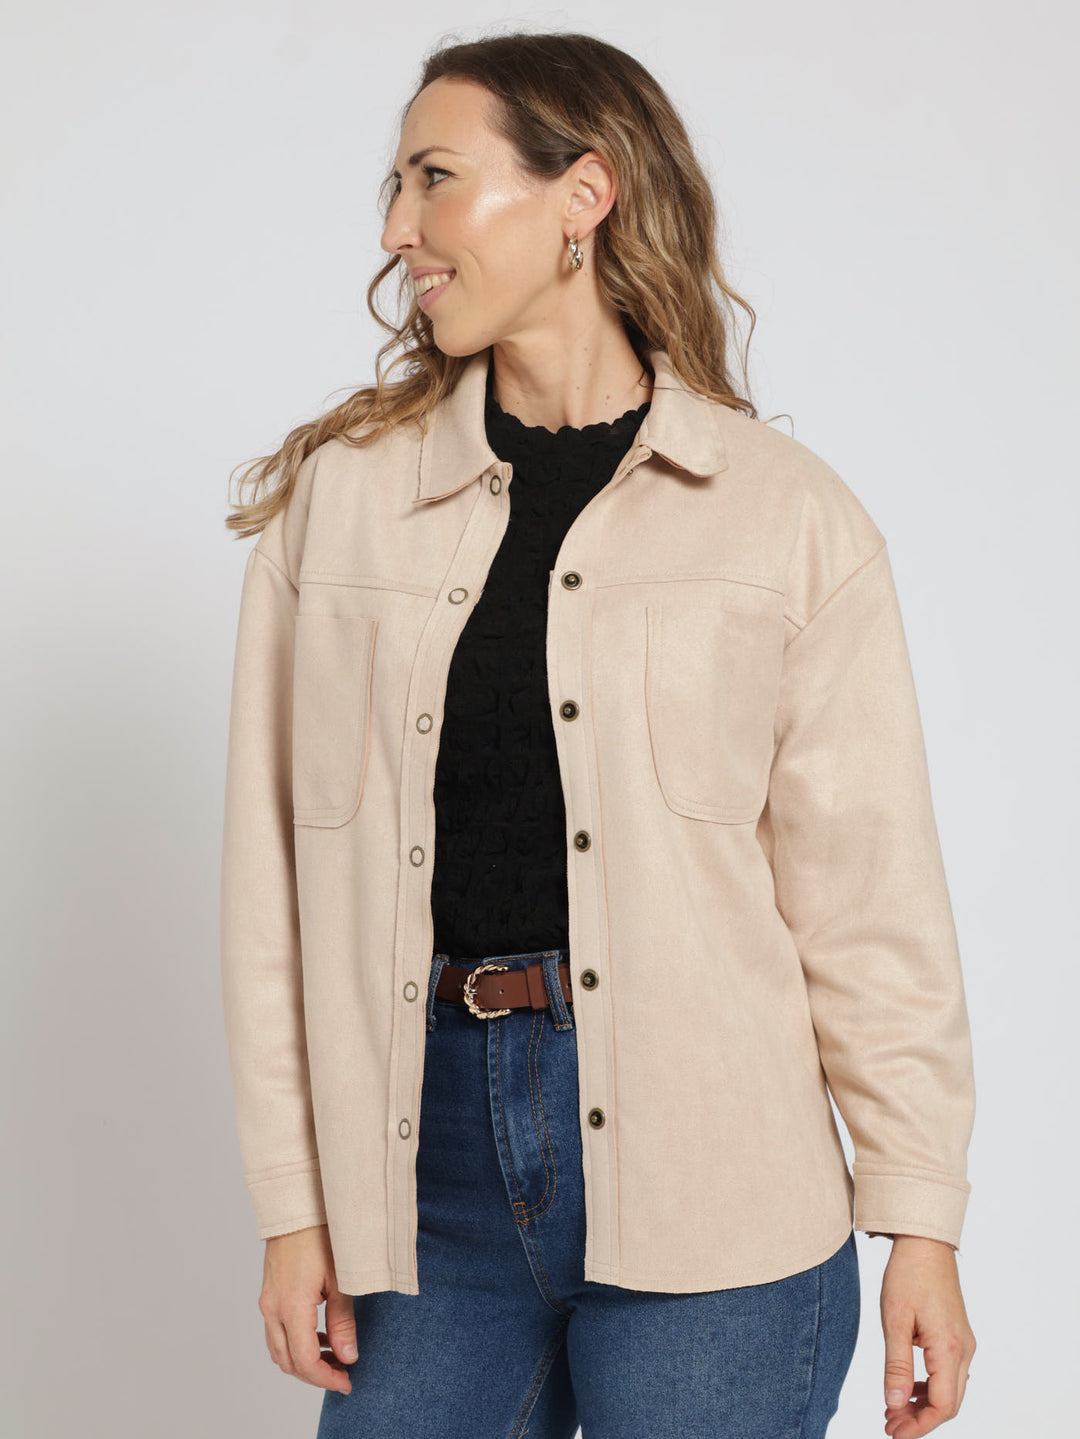 Long Sleeve Suede Shirt With Pockets - Stone